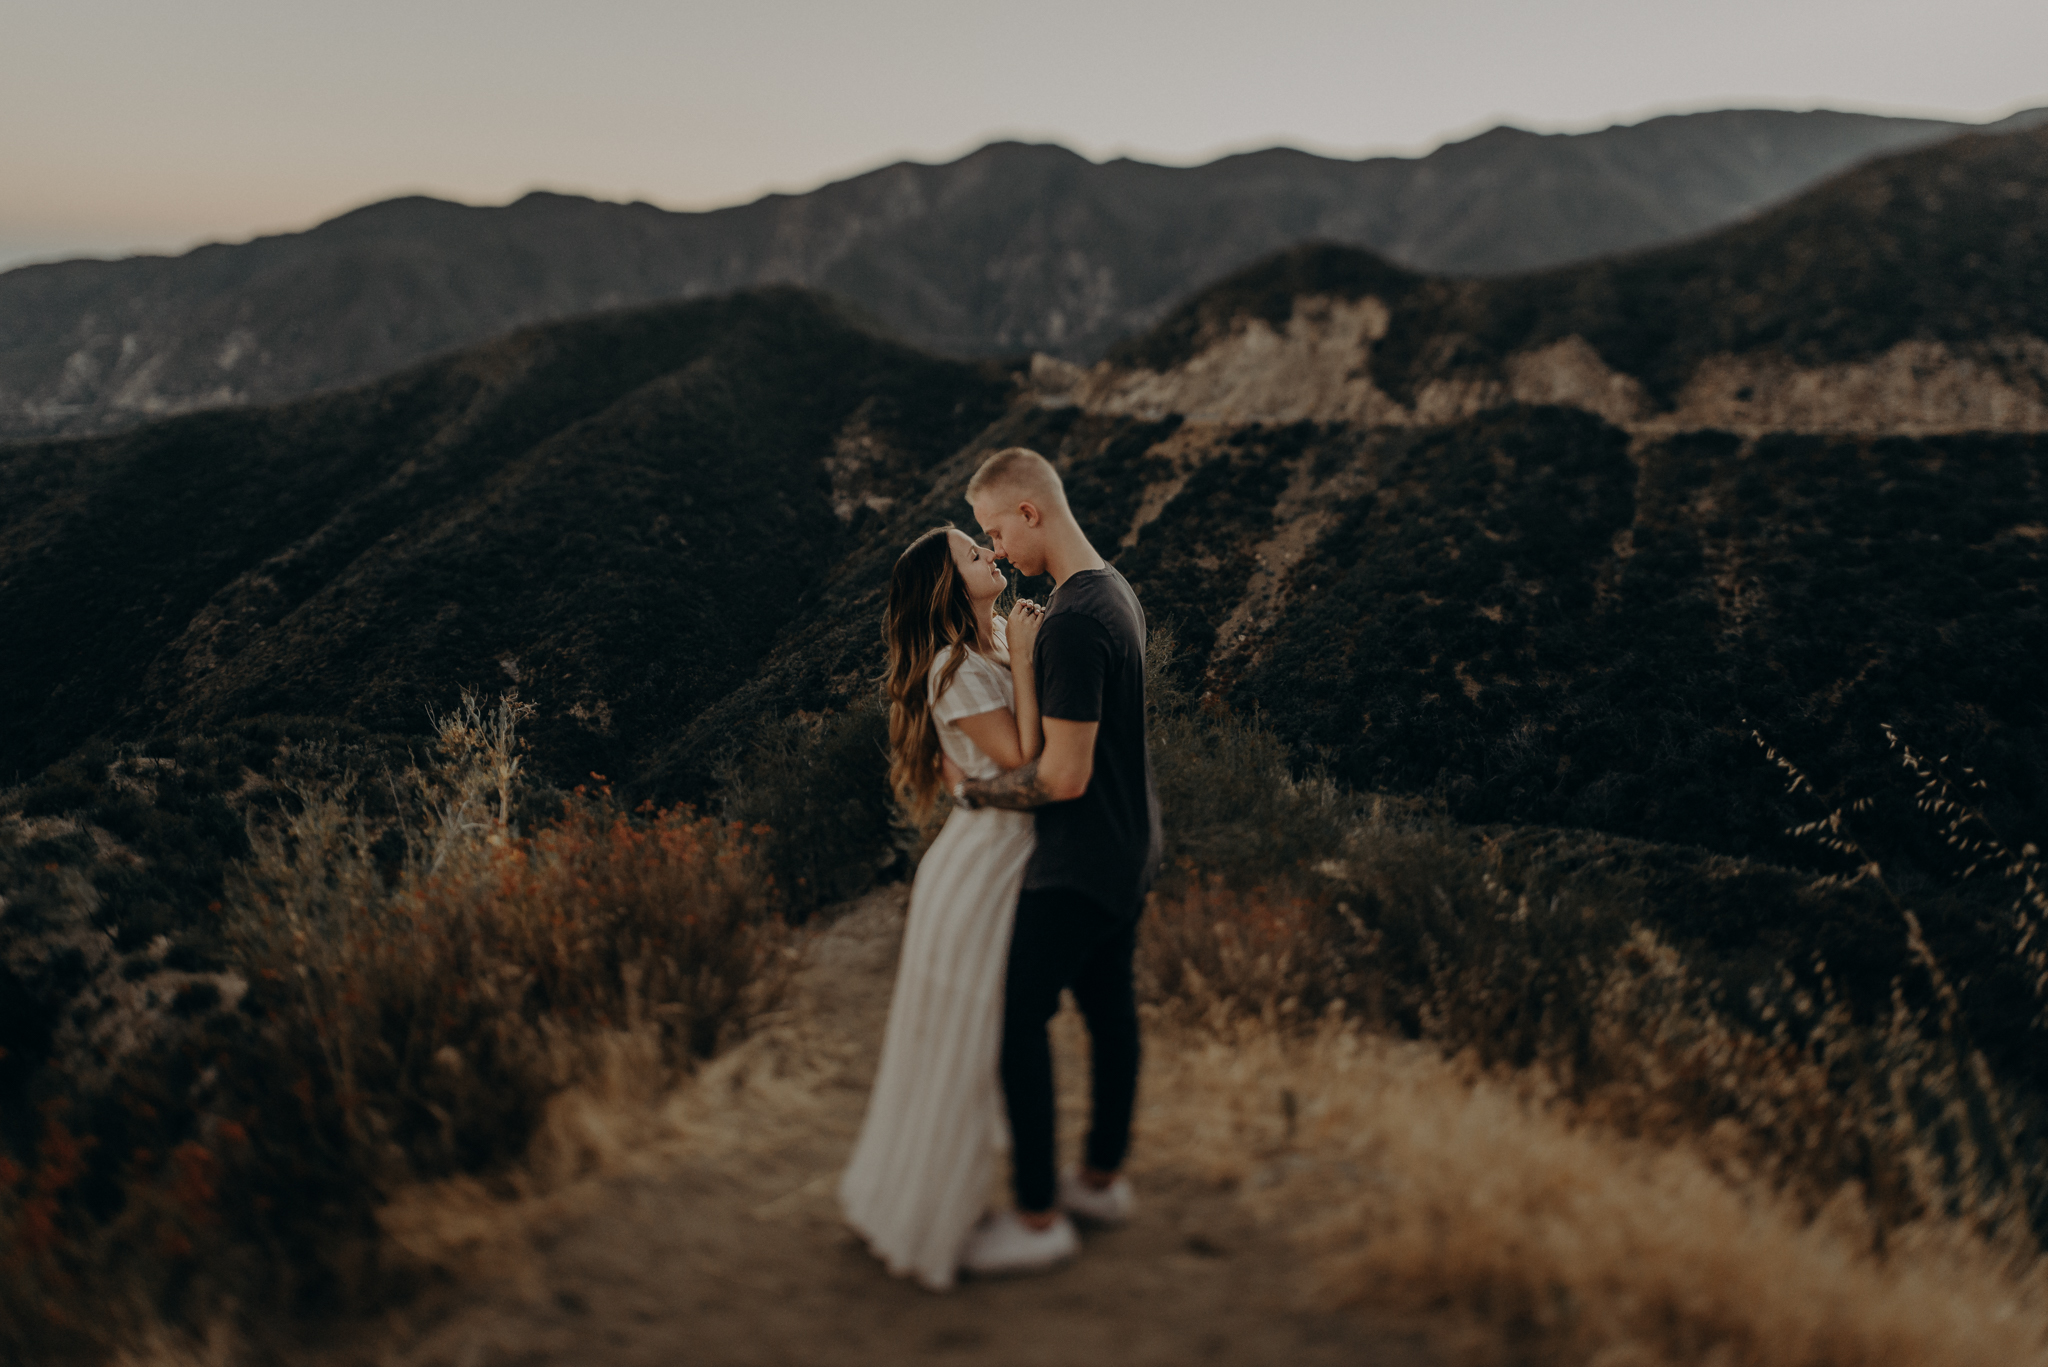 Isaiah + Taylor Photography - Los Angeles Forest Engagement Session - Laid back wedding photographer-023.jpg